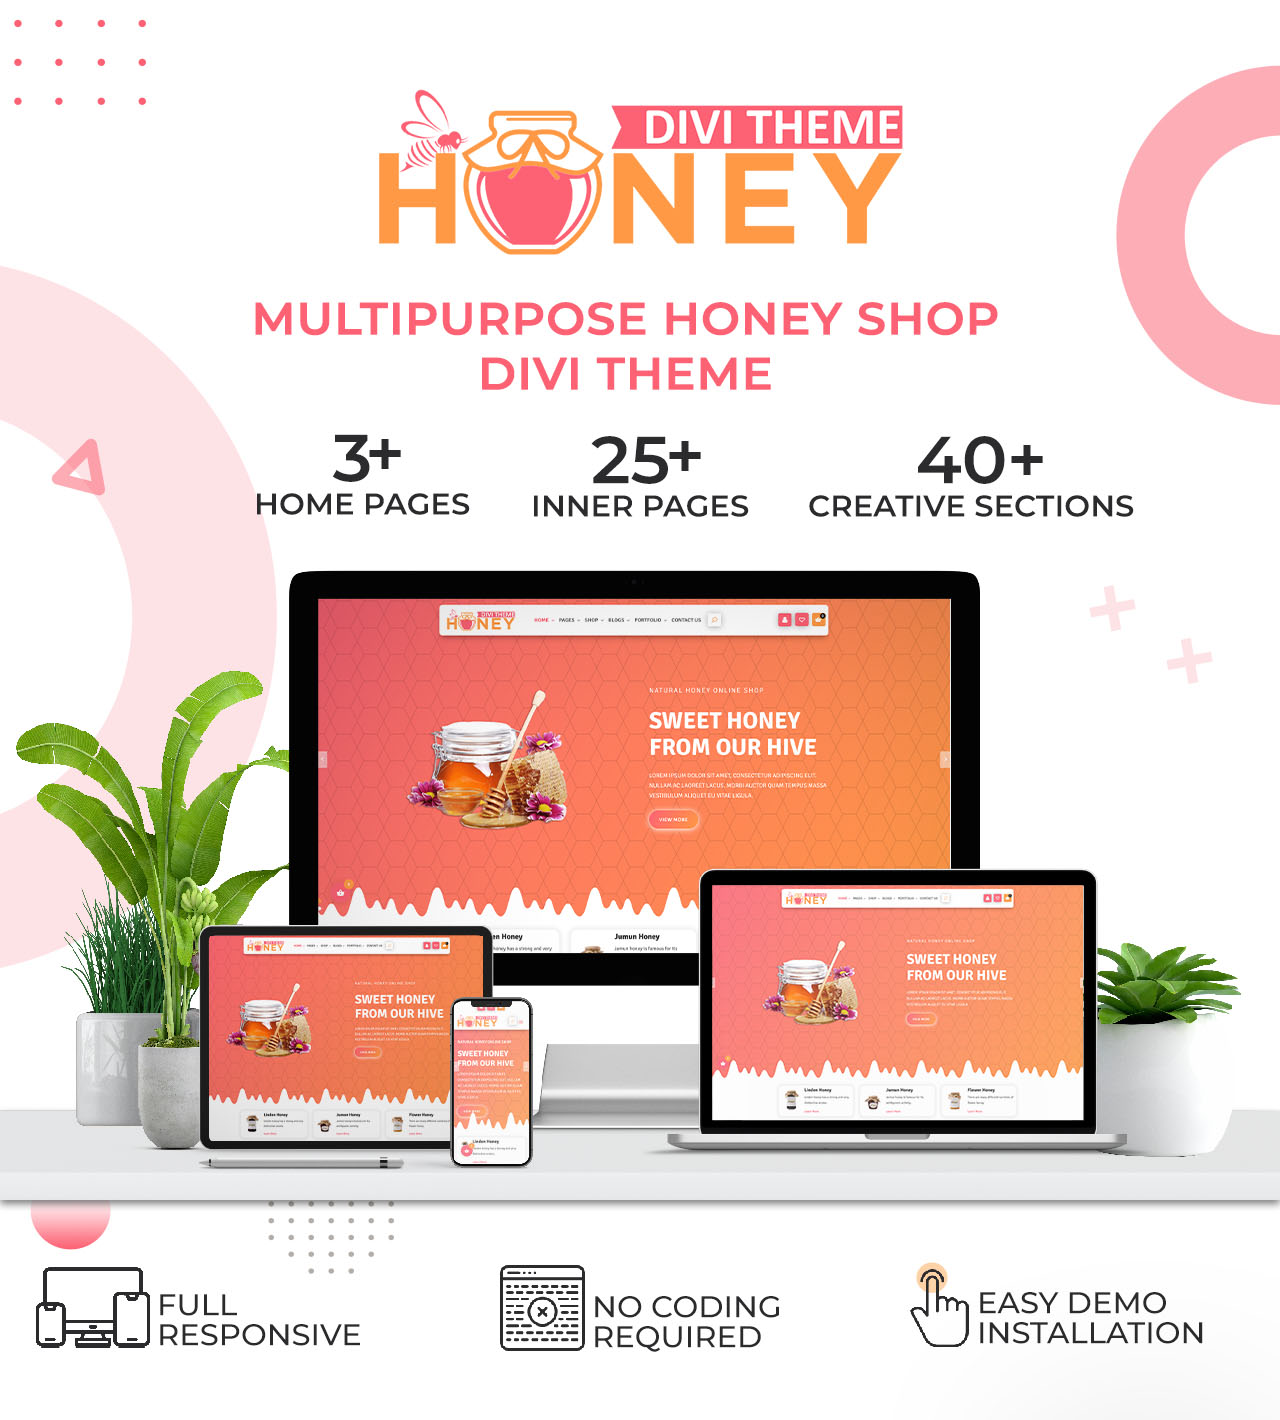 Furniture Shop Divi WooCommerce Theme intro Pages